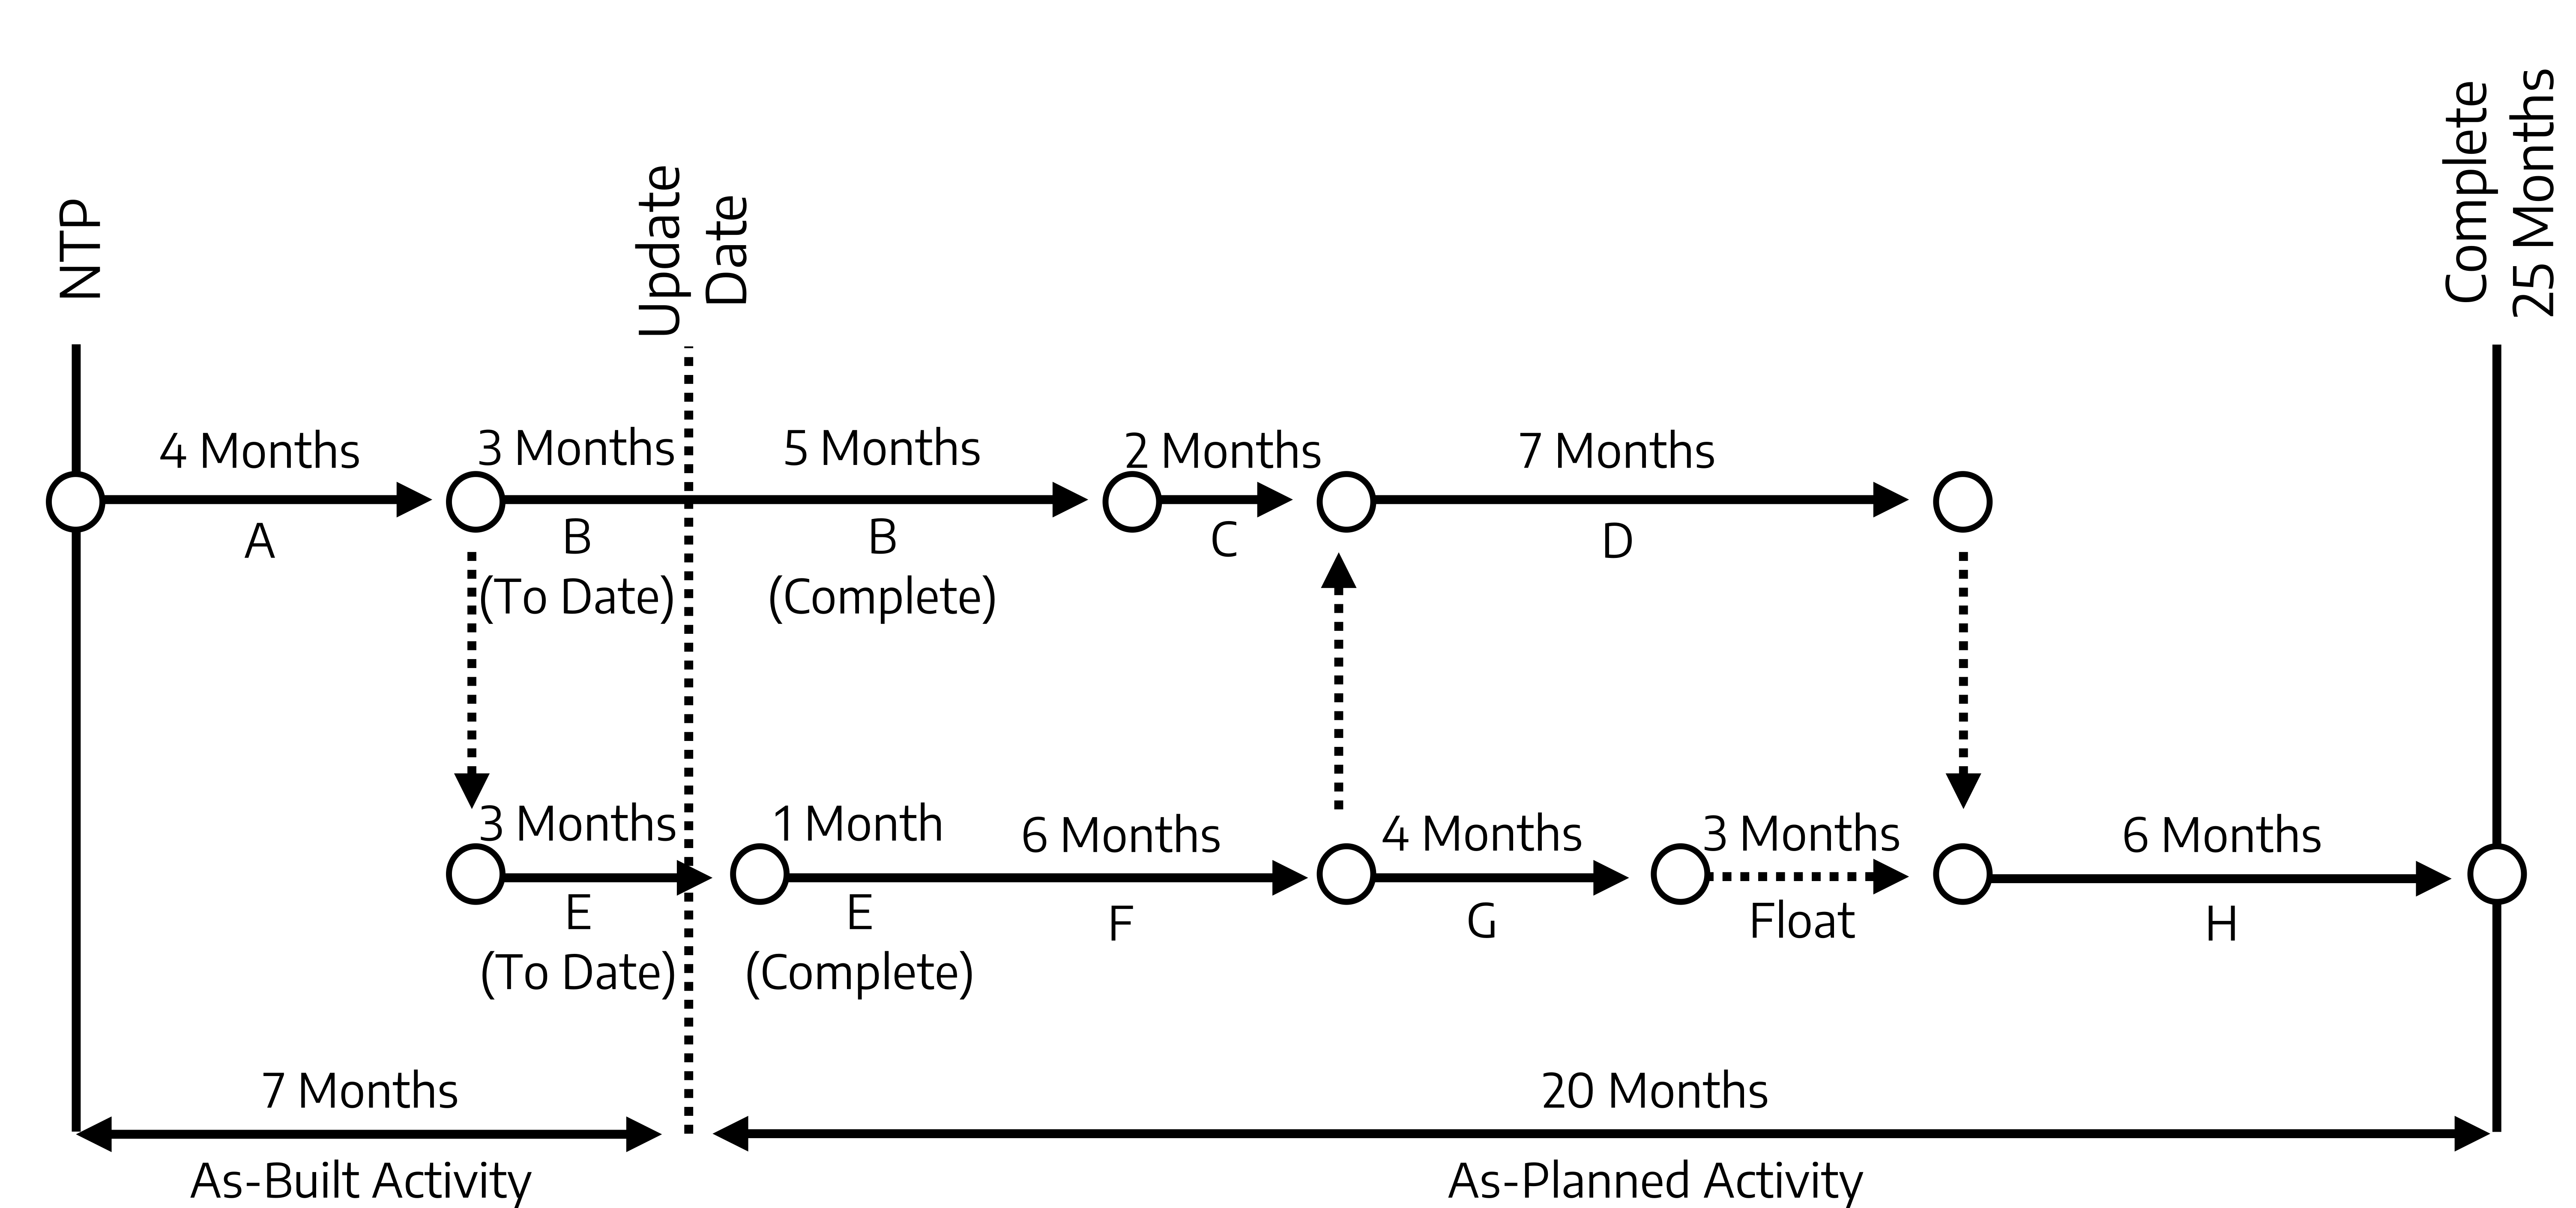 Same layout as figure 8-1 with the addition of a line beneath the other 2. Top line: A (4 months) to B (to date) (3 months) to B (complete) (5 months) to C (2 months) to D (7 months). Middle line: E (to date) (3 months) to E (complete) (1 month) to F (6 months) to G (4 months) to Float (3 months) (only dotted arrow) to H (6 months). Bottom line: NTP to Update date (As-built activity, 7 months), update date to complete (As-planned activity, 20 months).